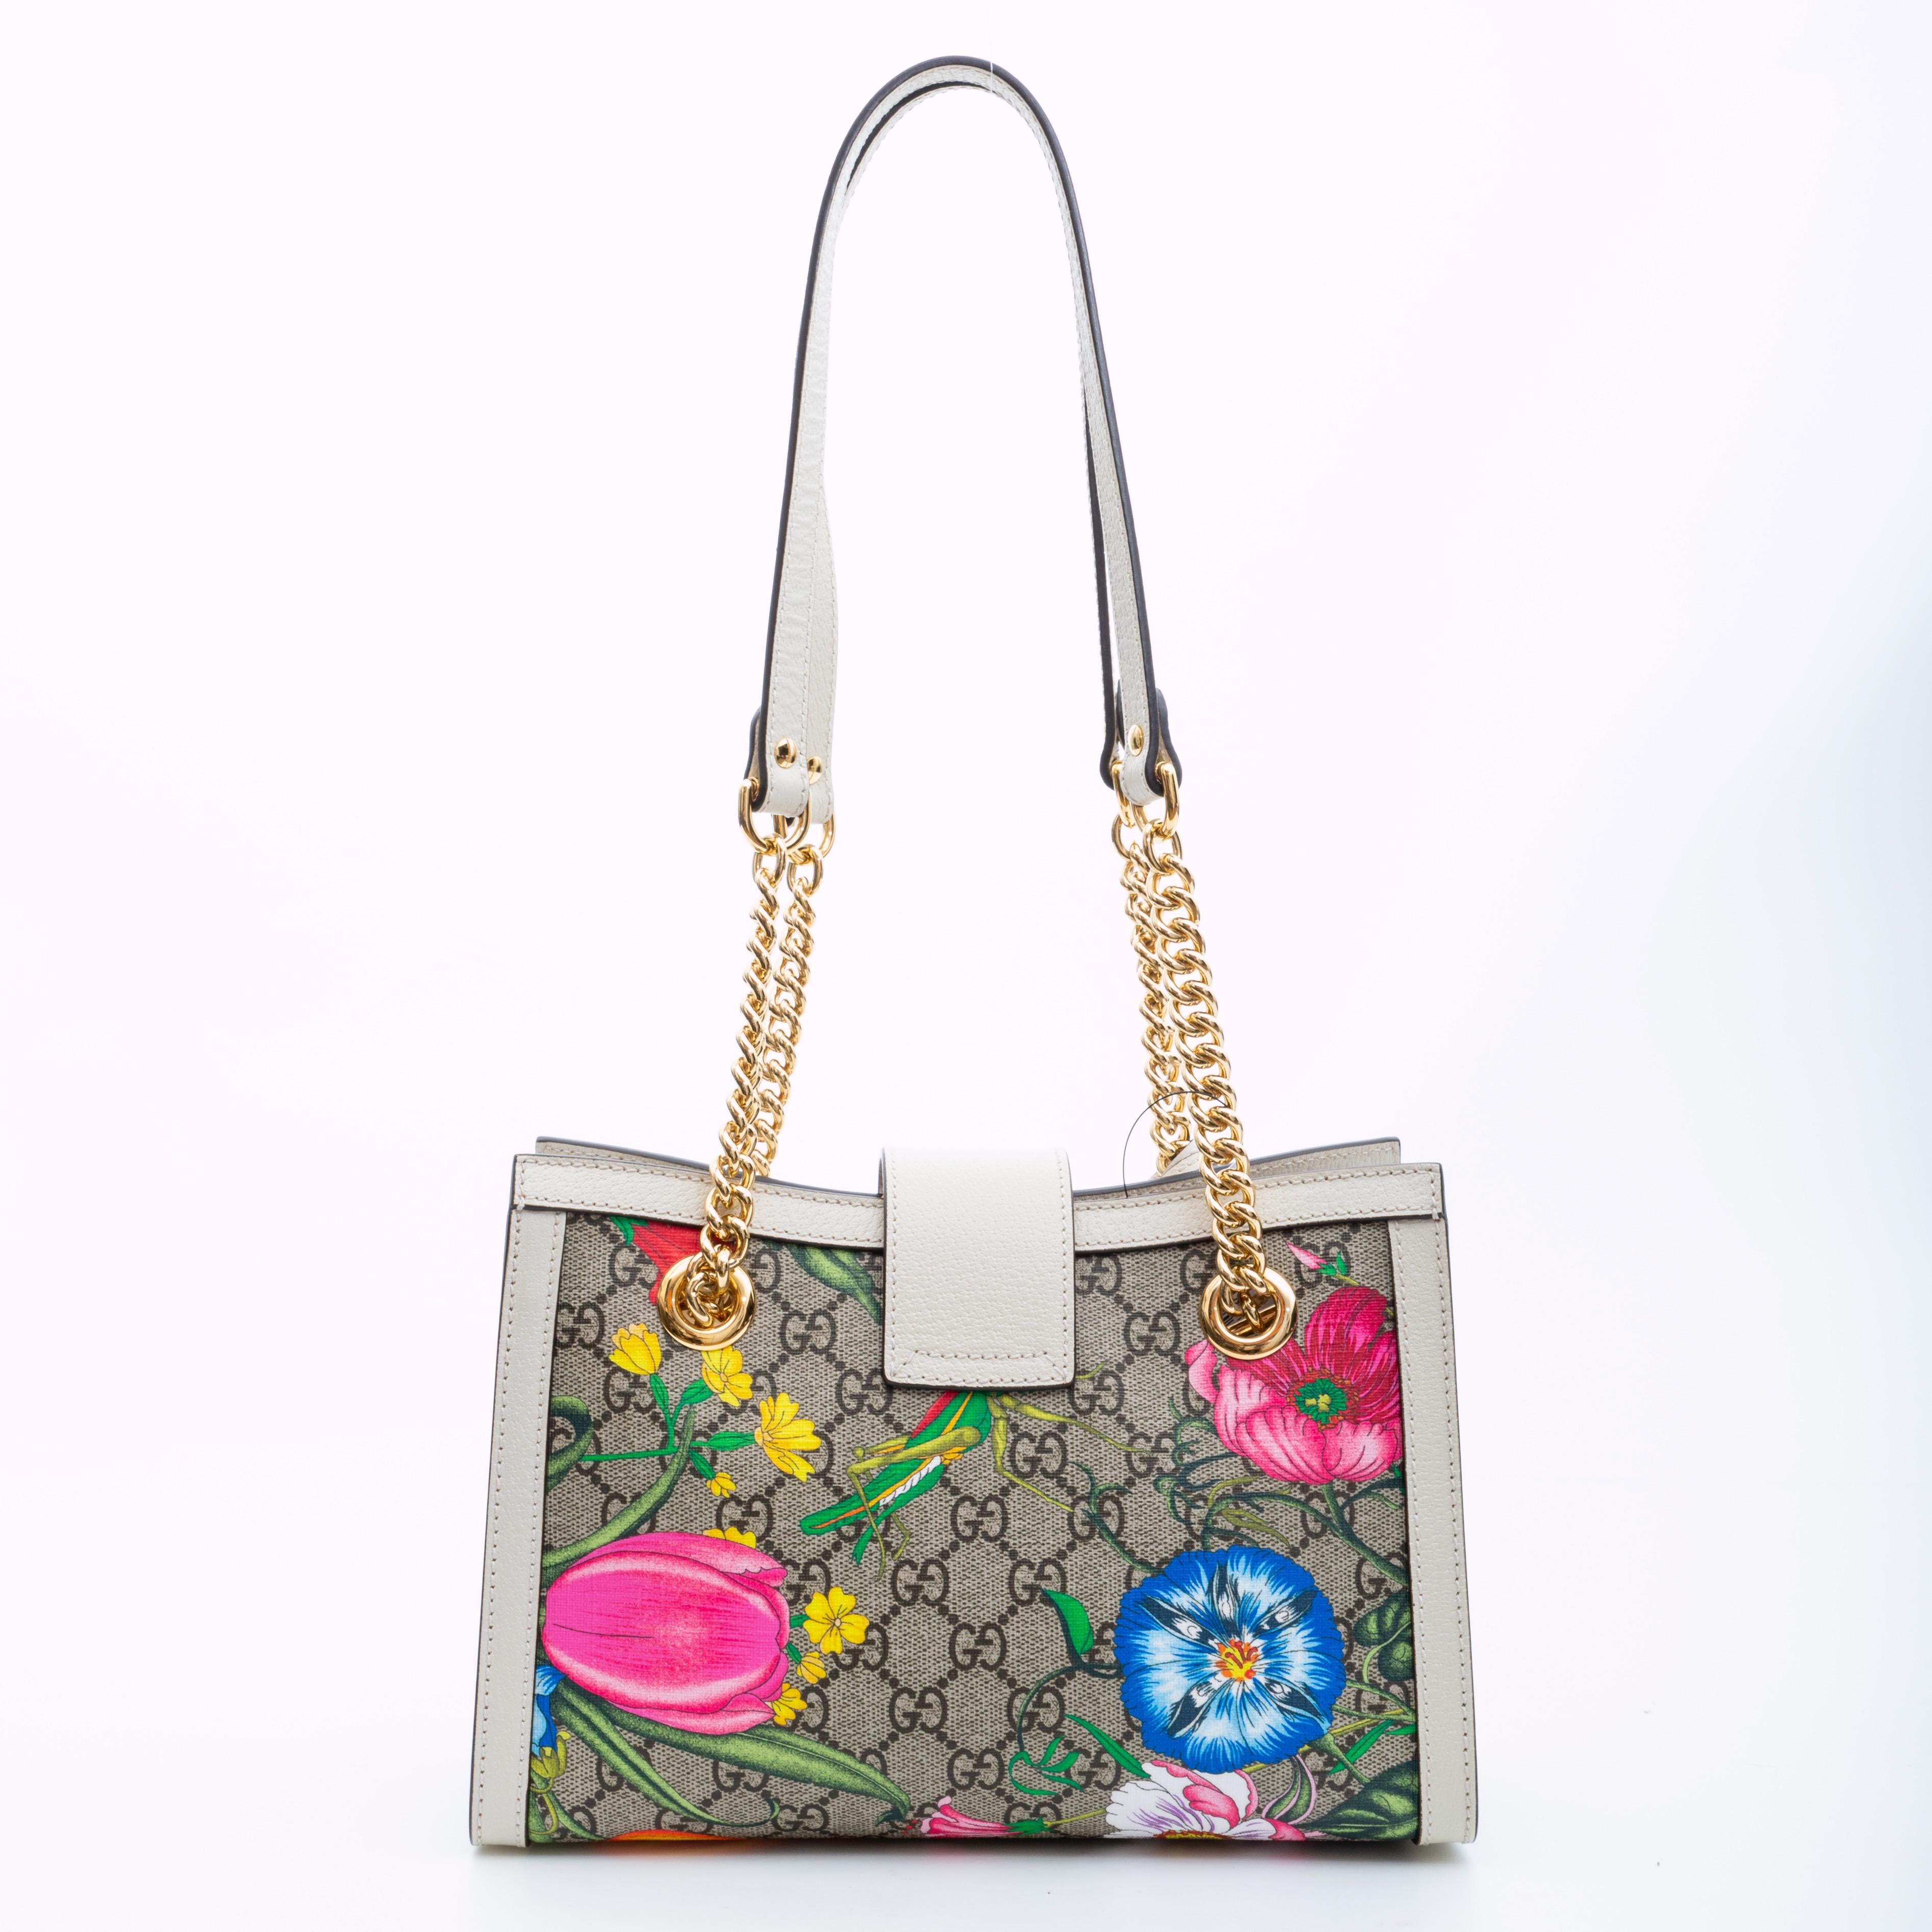 This handbag is made of a GG monogram canvas with a colorful floral printed overlay. The tote features ivory leather trim, polished gold hardware, and dual flat ivory coloured leather and chain shoulder straps. A top crossover leather band with